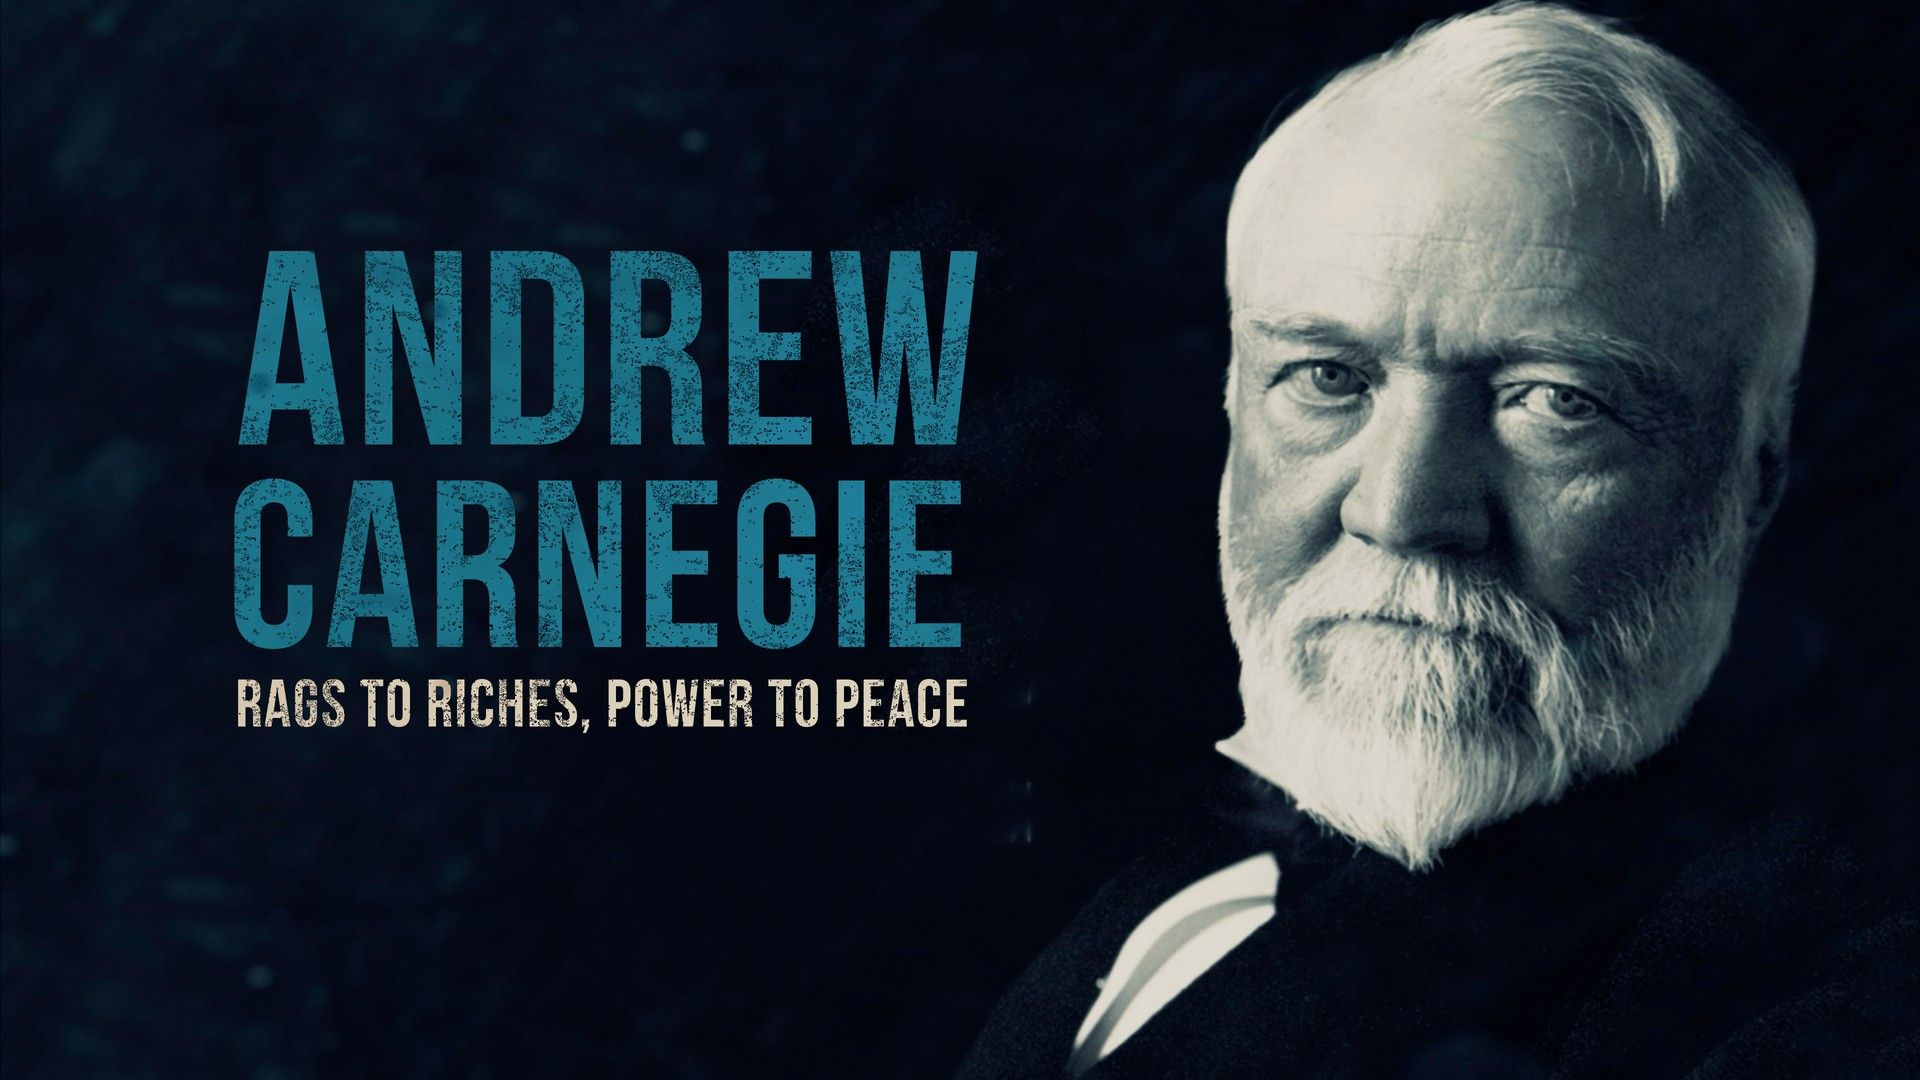 Andrew Carnegie: Rags to Riches, Power to Peace